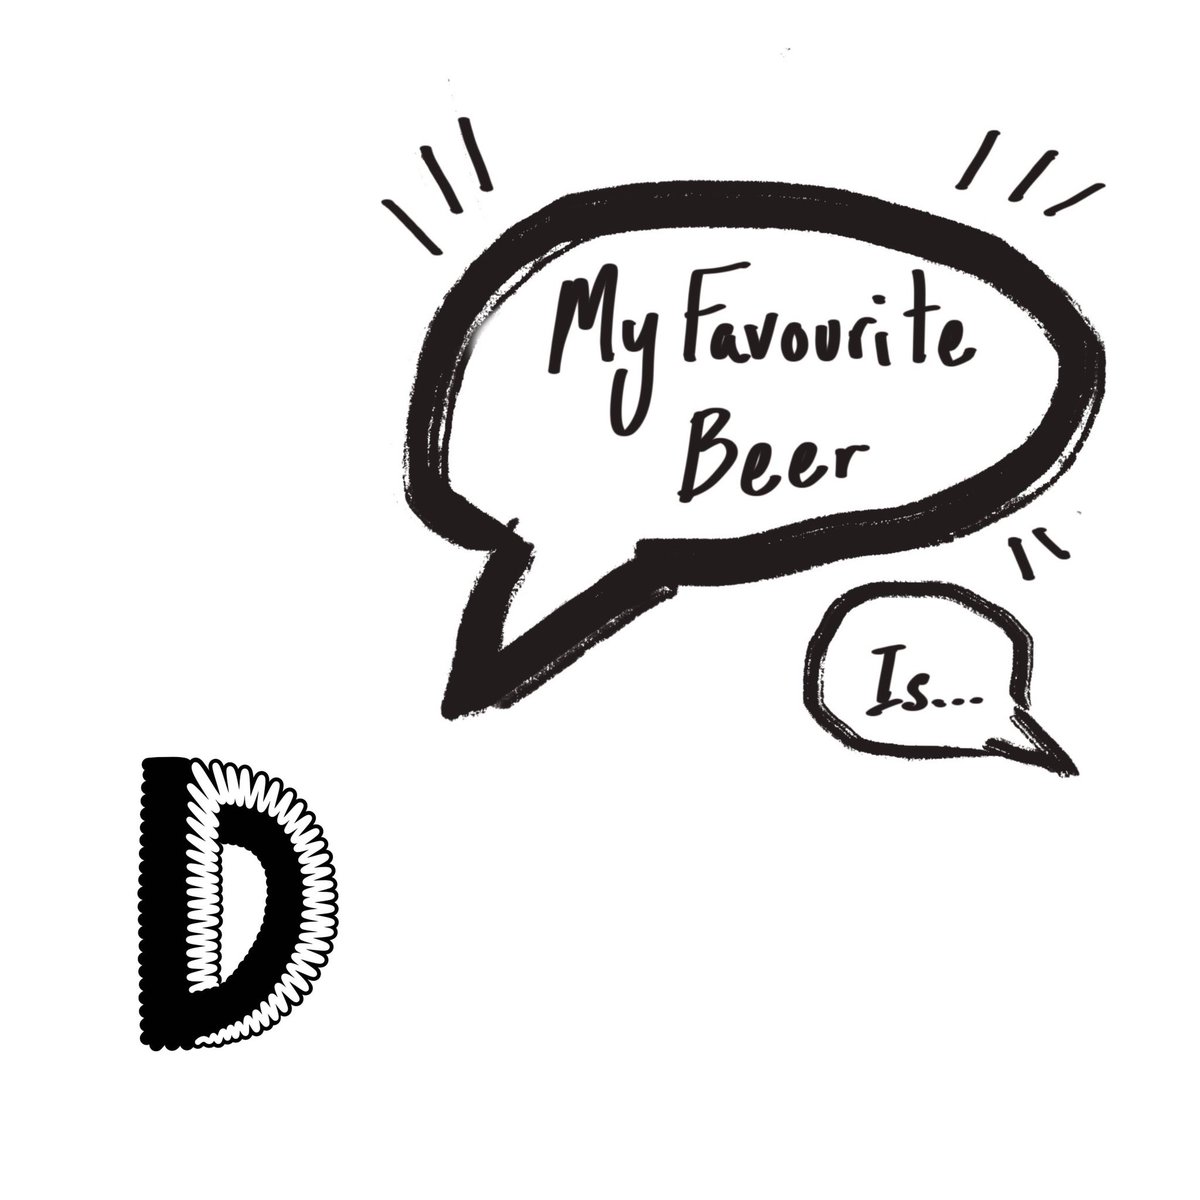 Next up, we’ll be asking @DurationBeer what their favourite beer is? Find out Tomorrow, Friday 31st, pouring along side the brew that was inspired from it and their favourite beer that they brew! #cityofale @CityOfAle #favouritebeer #beer #norwichpub #norfolkbeer #nr3